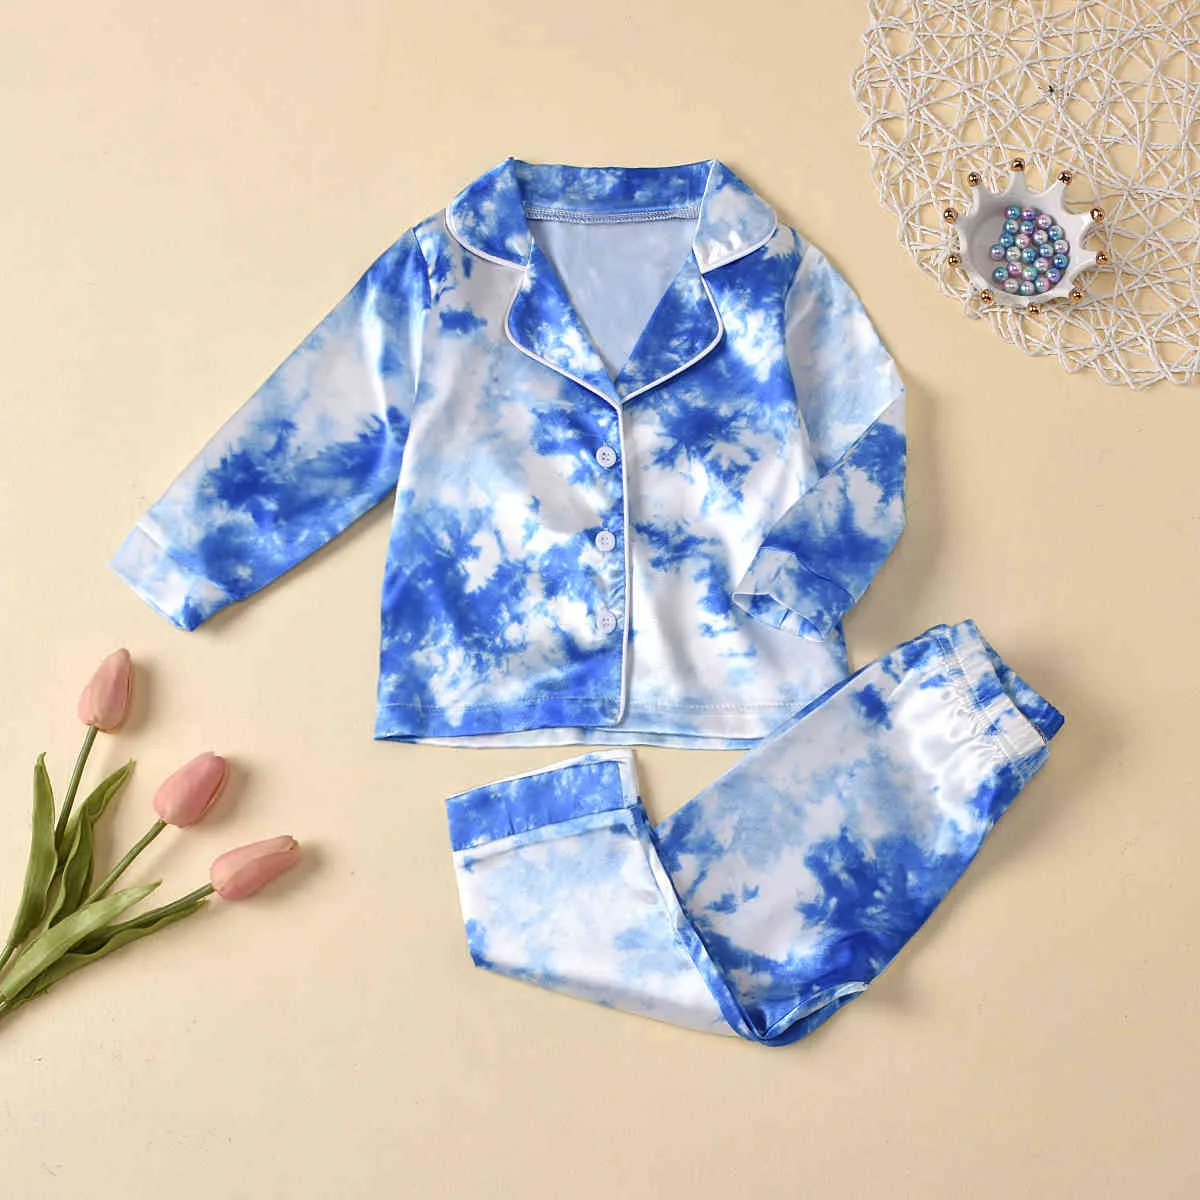 1-7Y Autumn Spring Toddler Kid Baby Girl Boy Pajama Sets Tie Dye Long Sleeve Casual Sleepwear For Children Outfits 210515